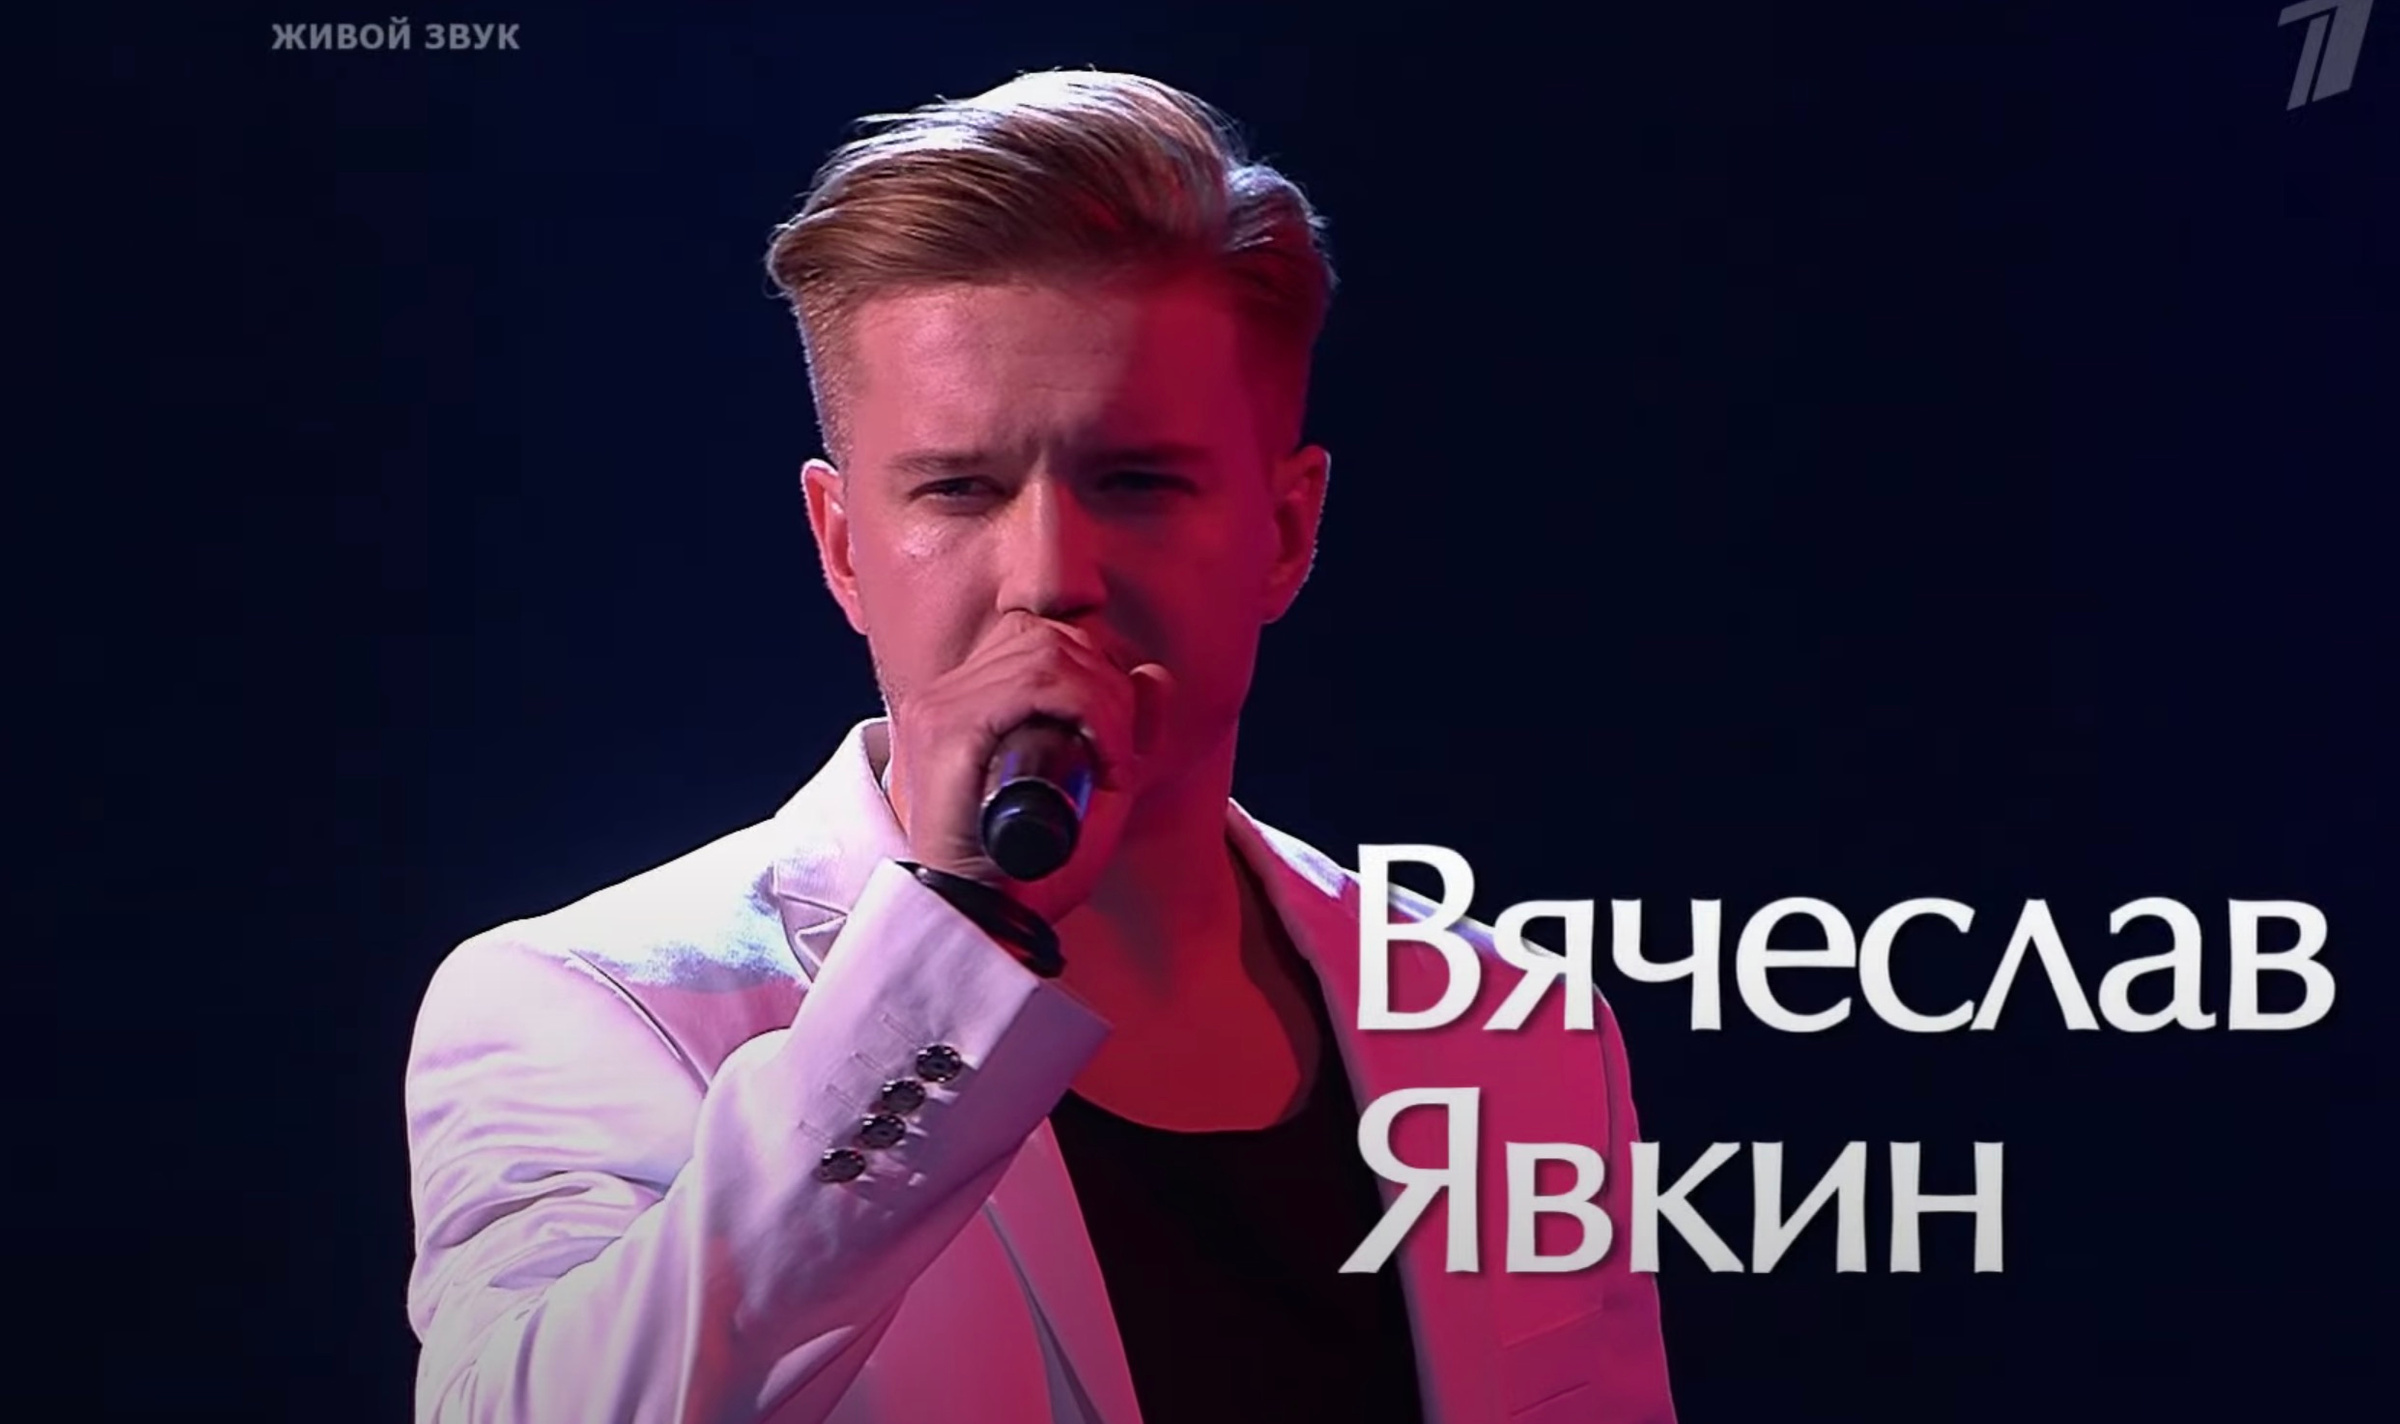 © YouTube / "Голос" / The Voice Russia